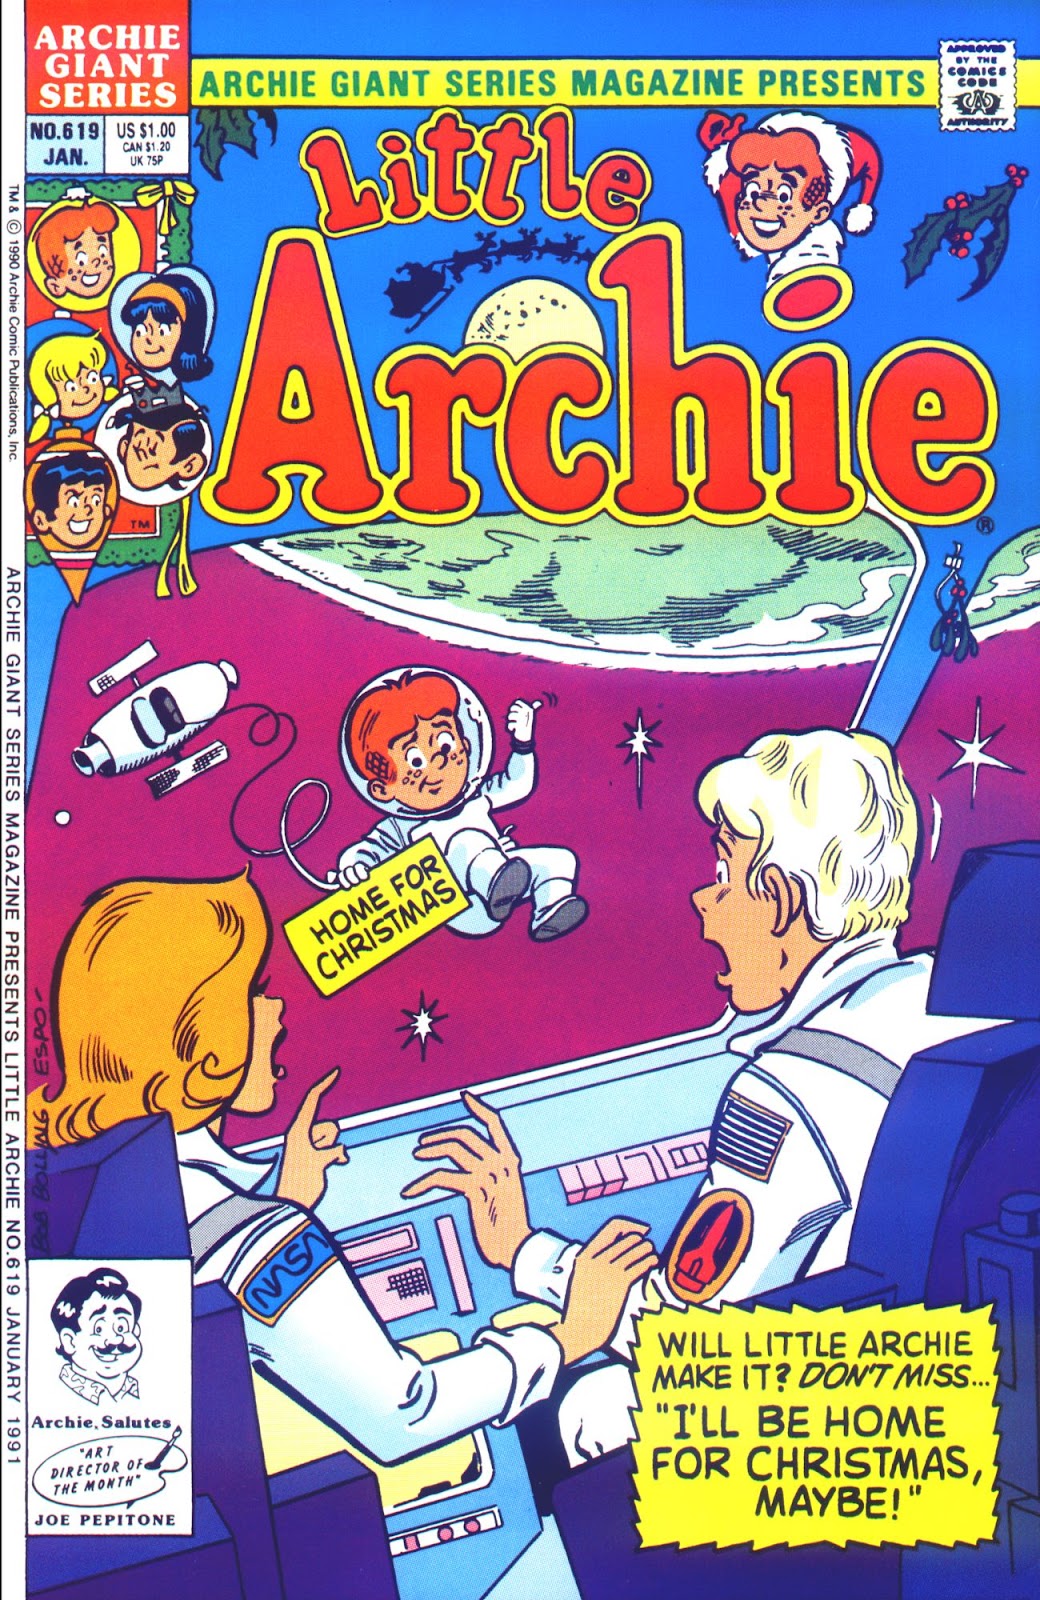 Archie Giant Series Magazine 619 Page 1